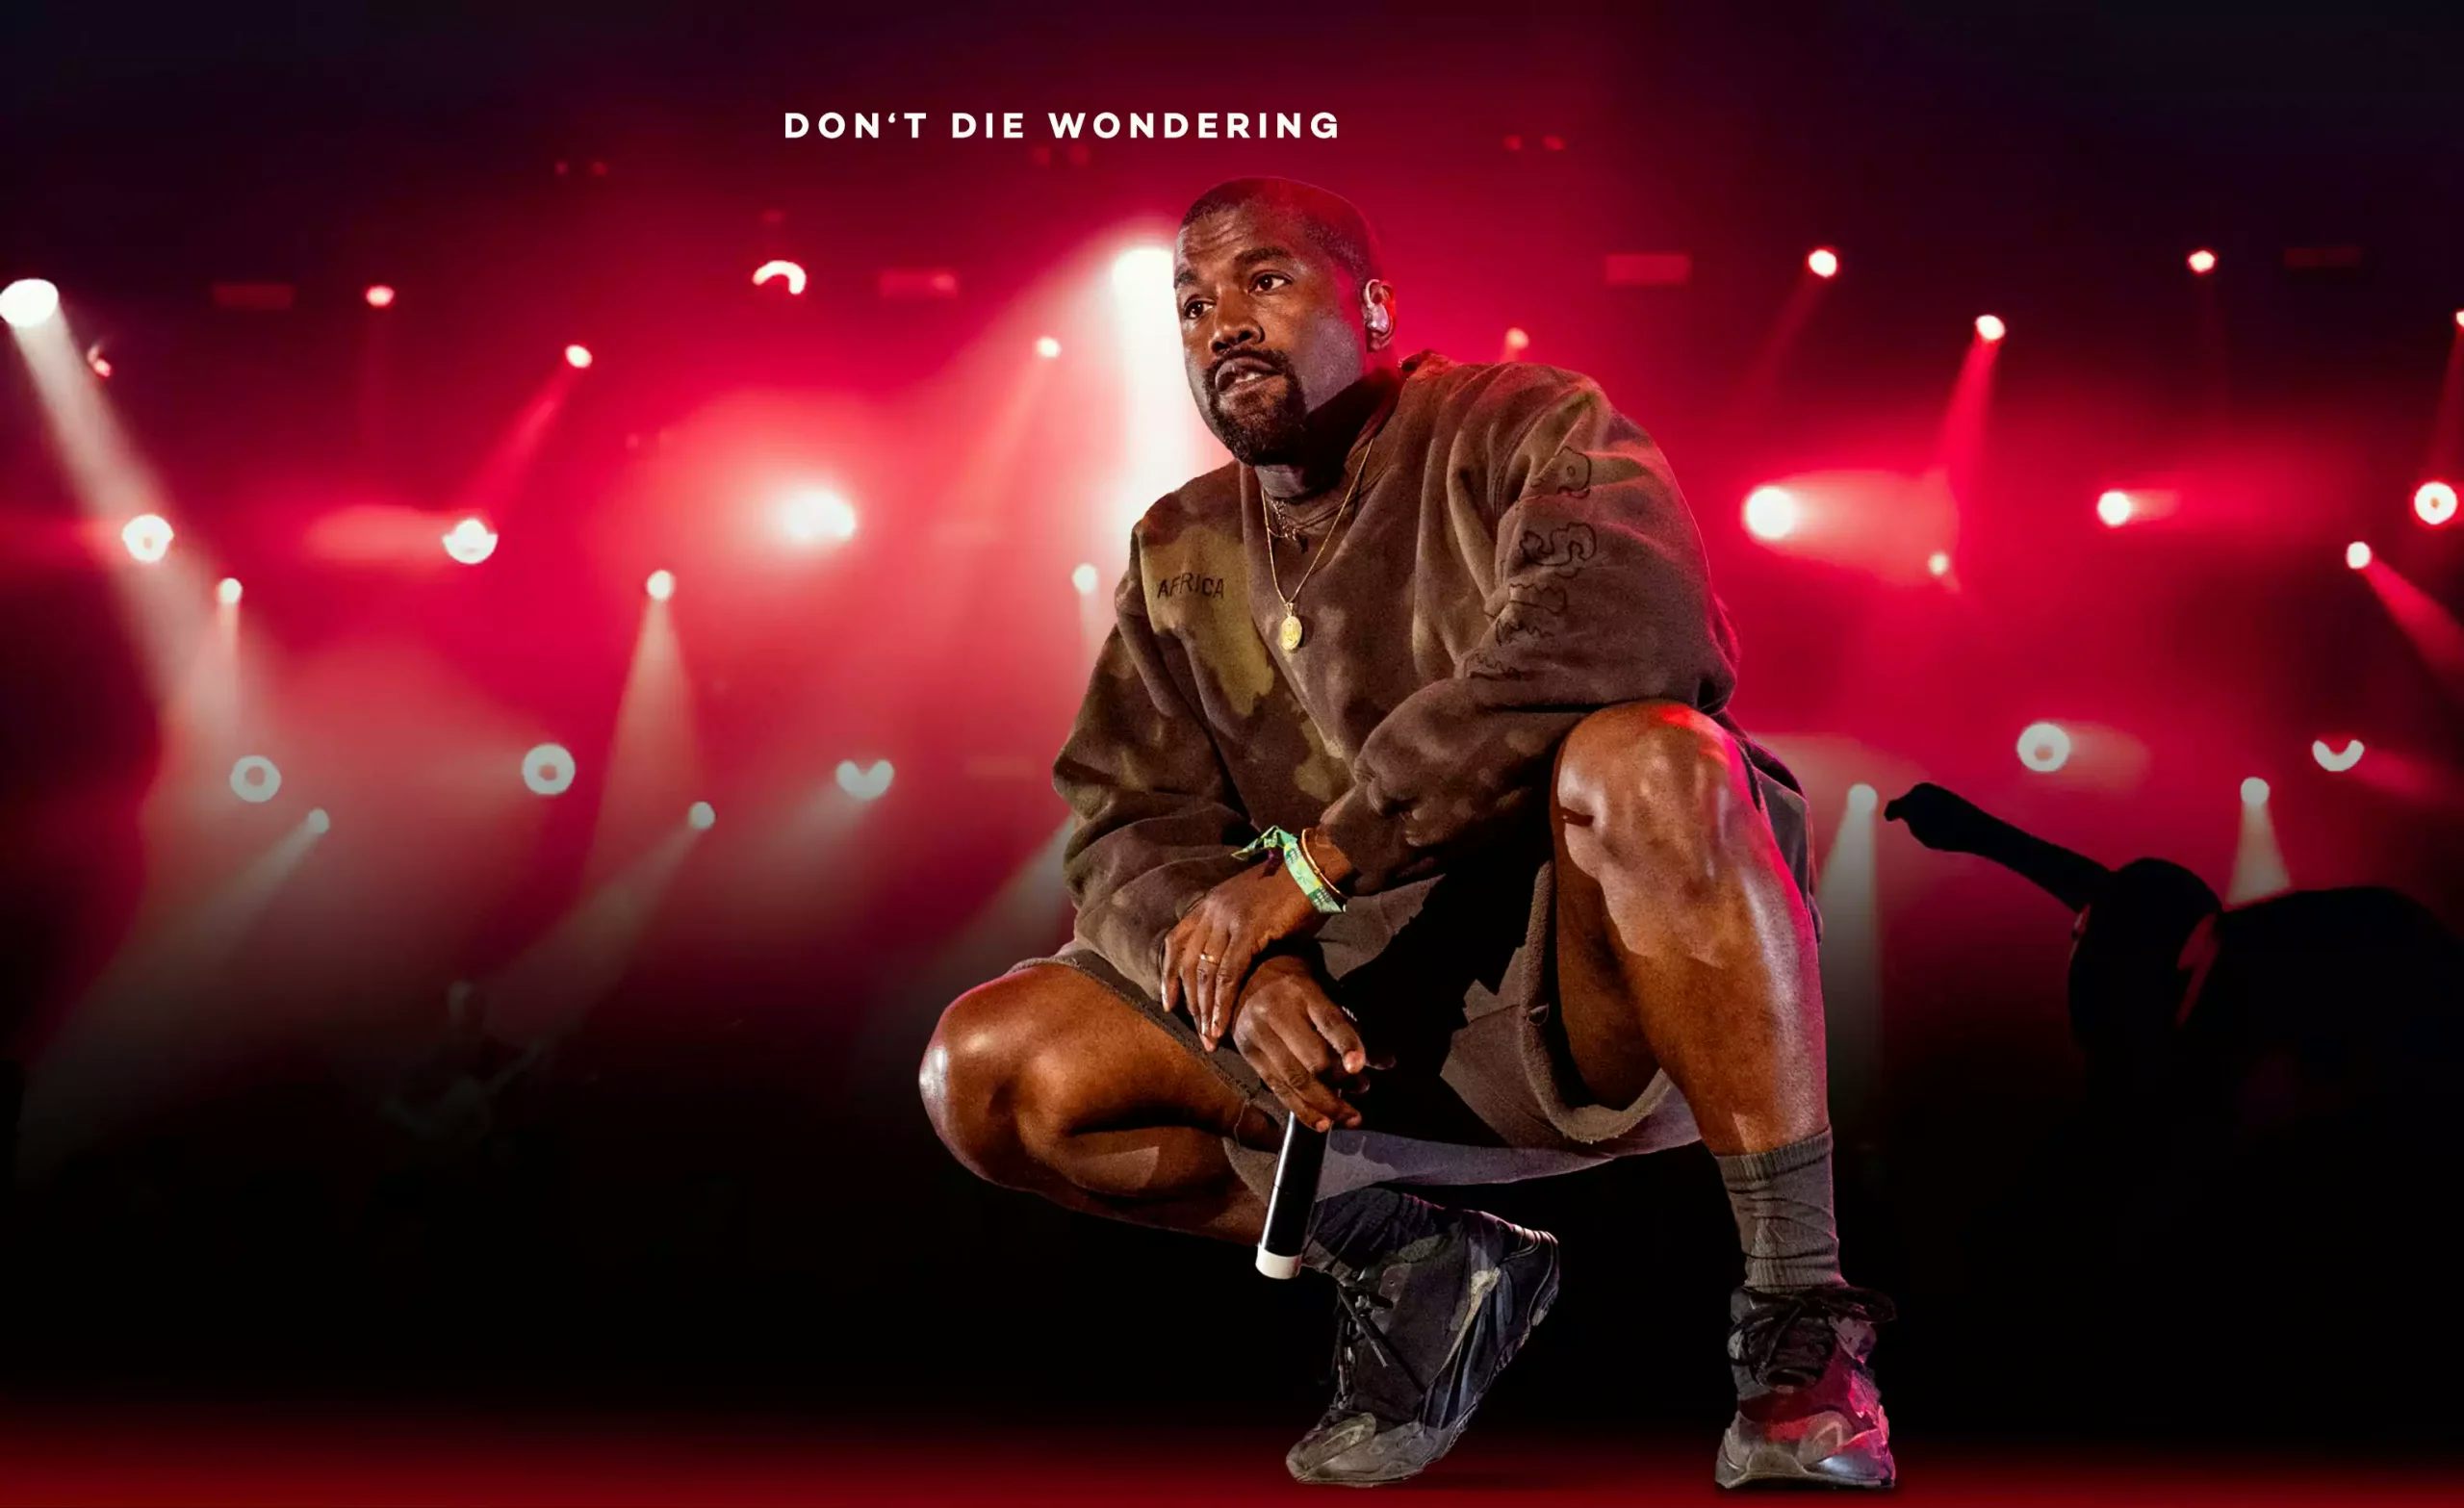 When Can We Expect To Hear ‘DONDA’, Kanye West’s Tenth Album?